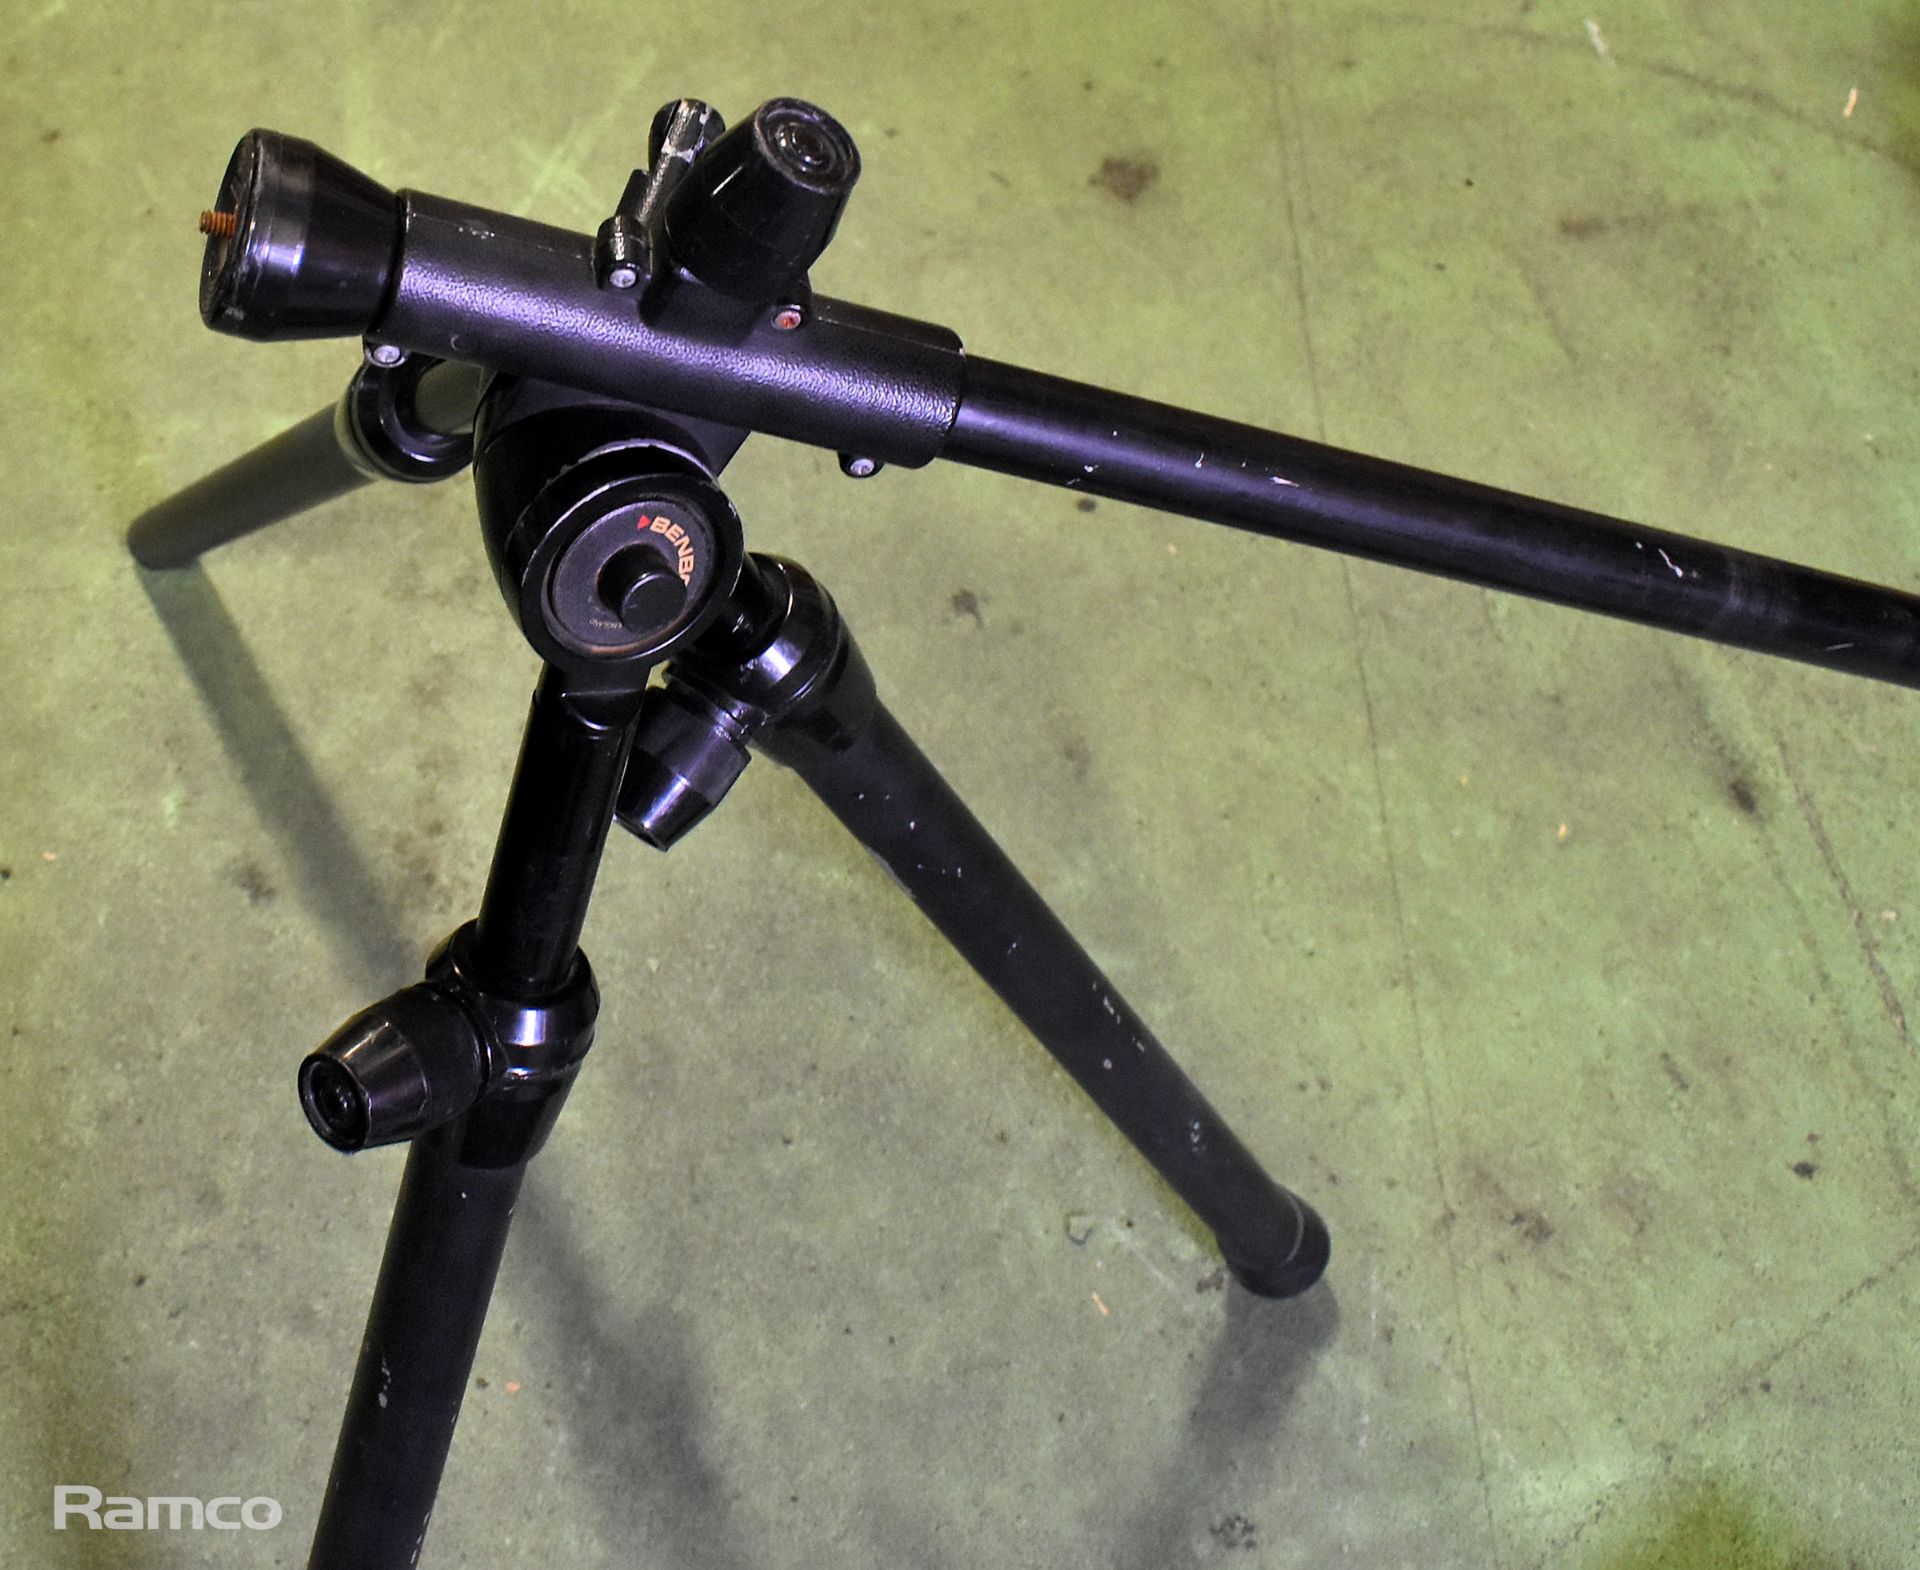 Benbo 1 camera tripod with case - Image 4 of 5